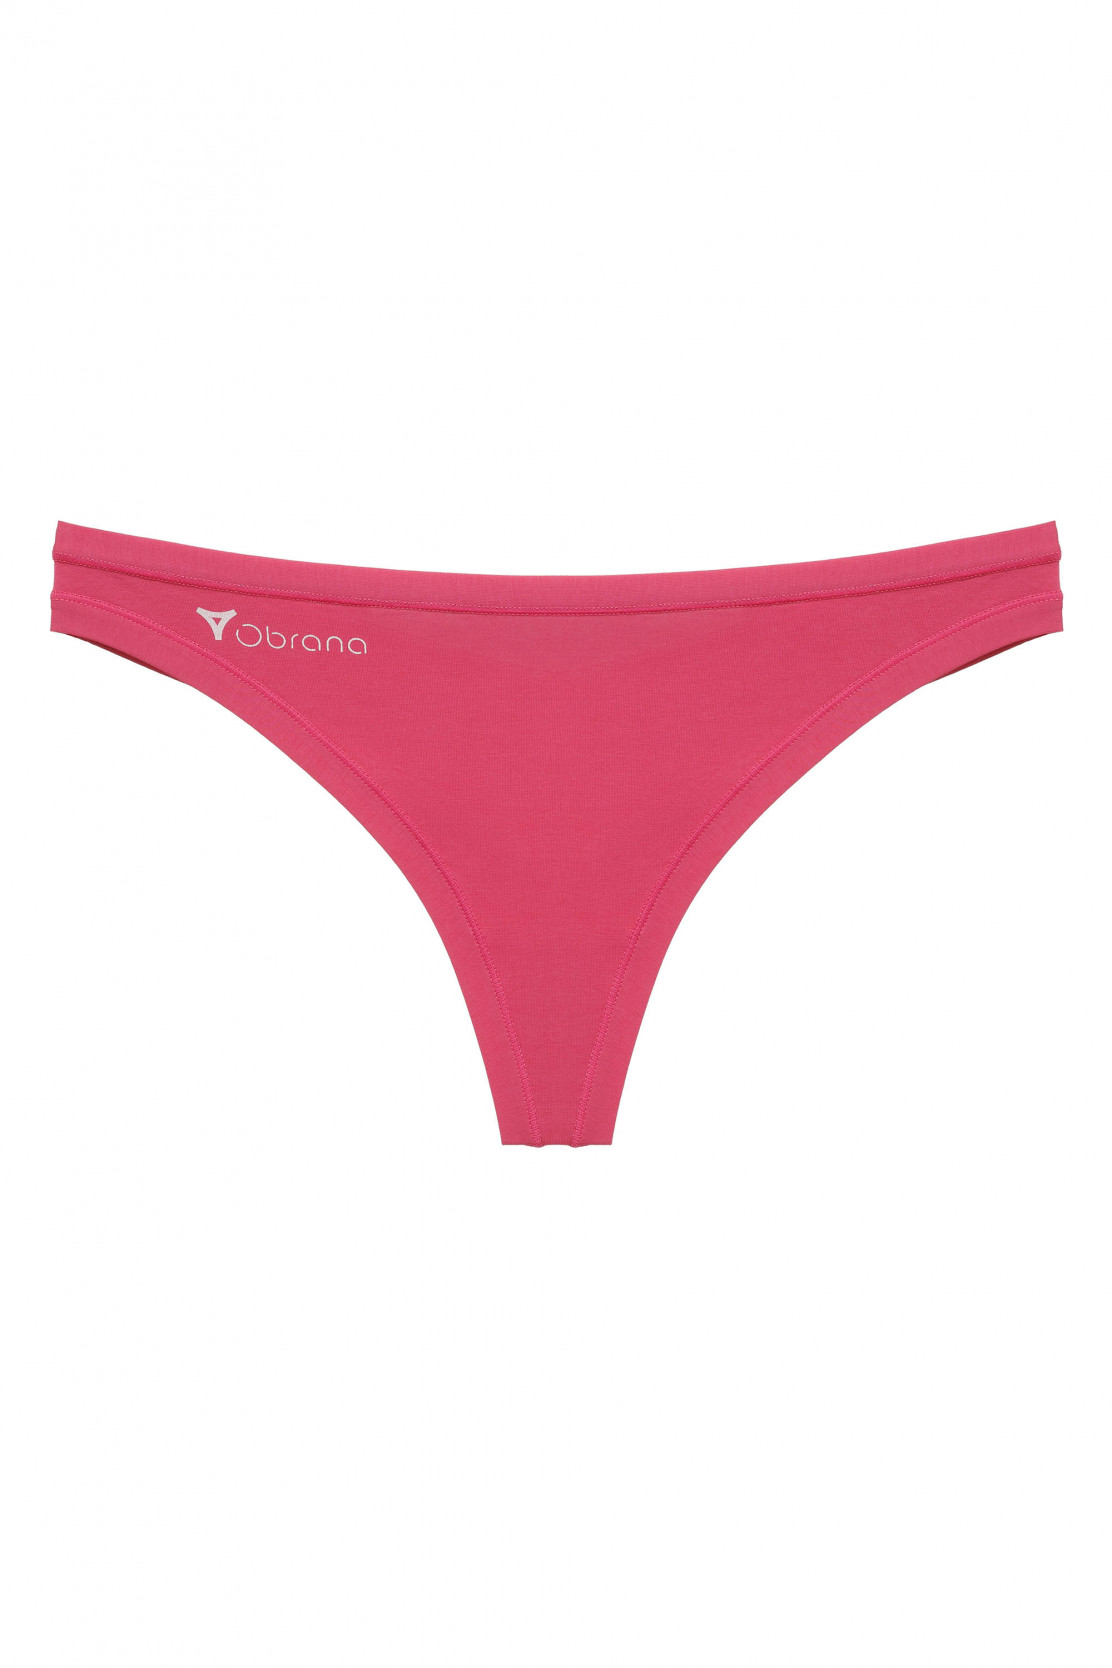 Net Women Thongs Panty at Rs 30/piece in New Delhi